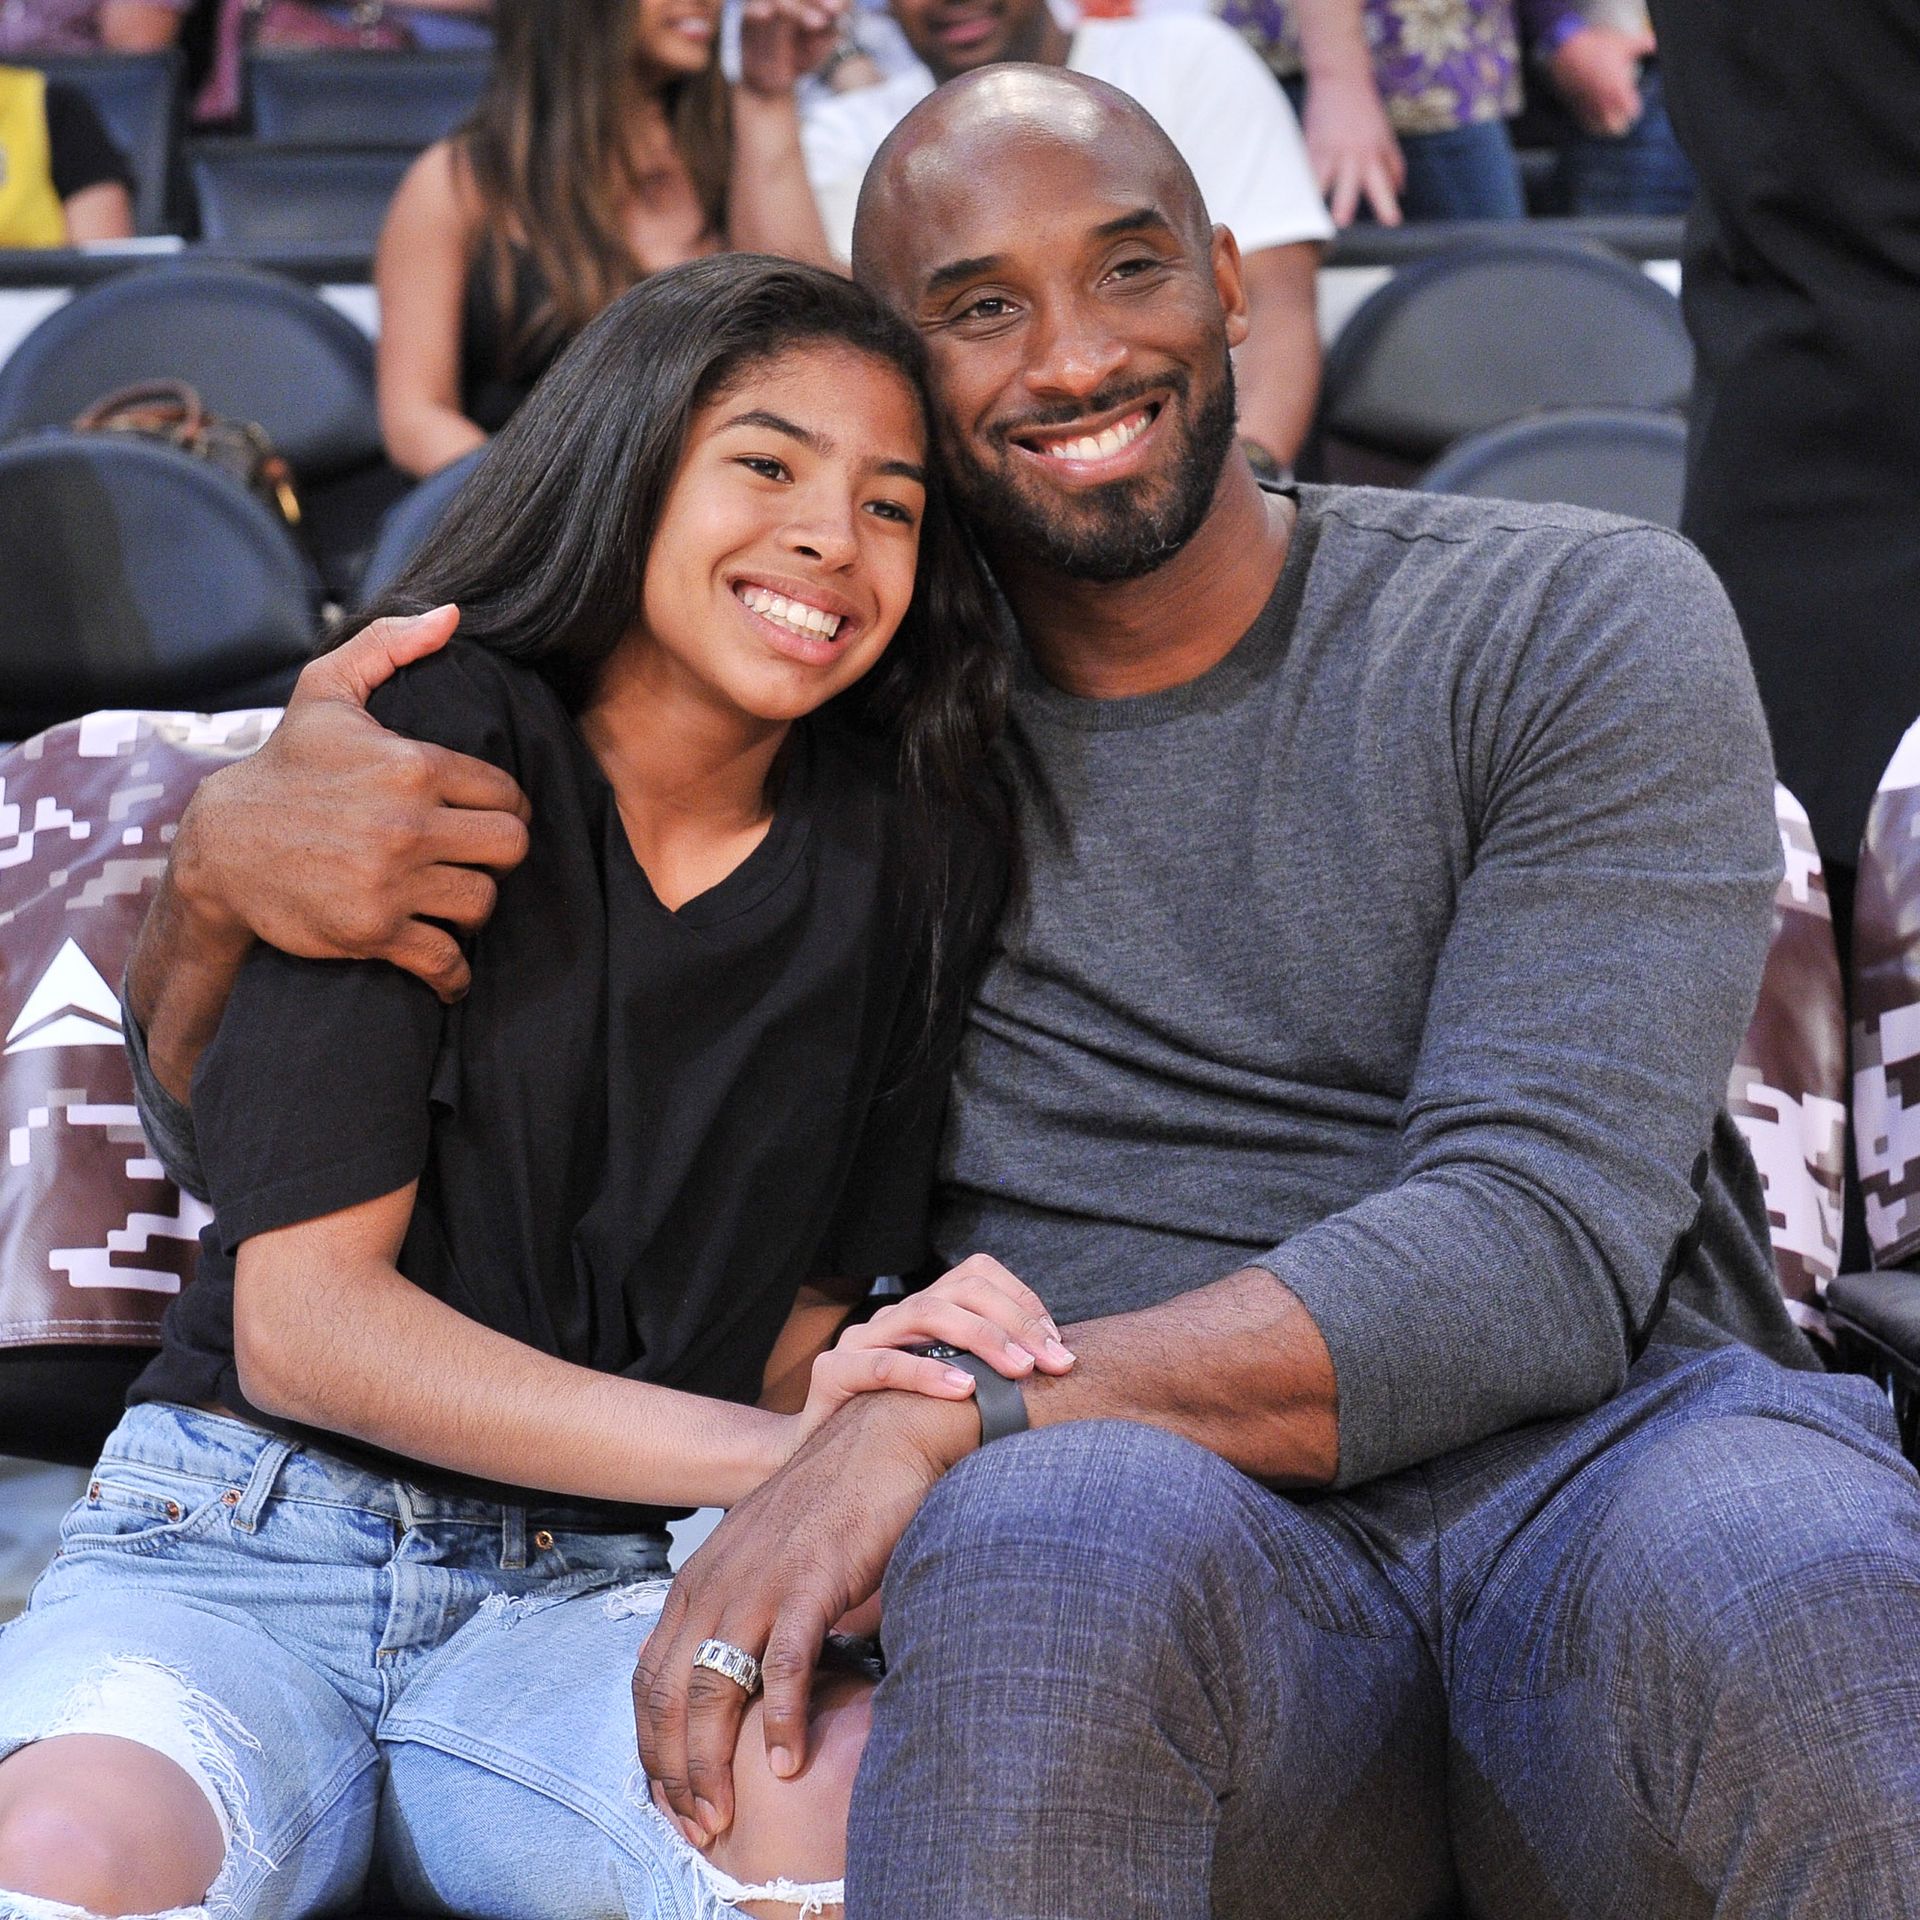 Kobe Bryant's daughter Gianna has her jersey retired from private